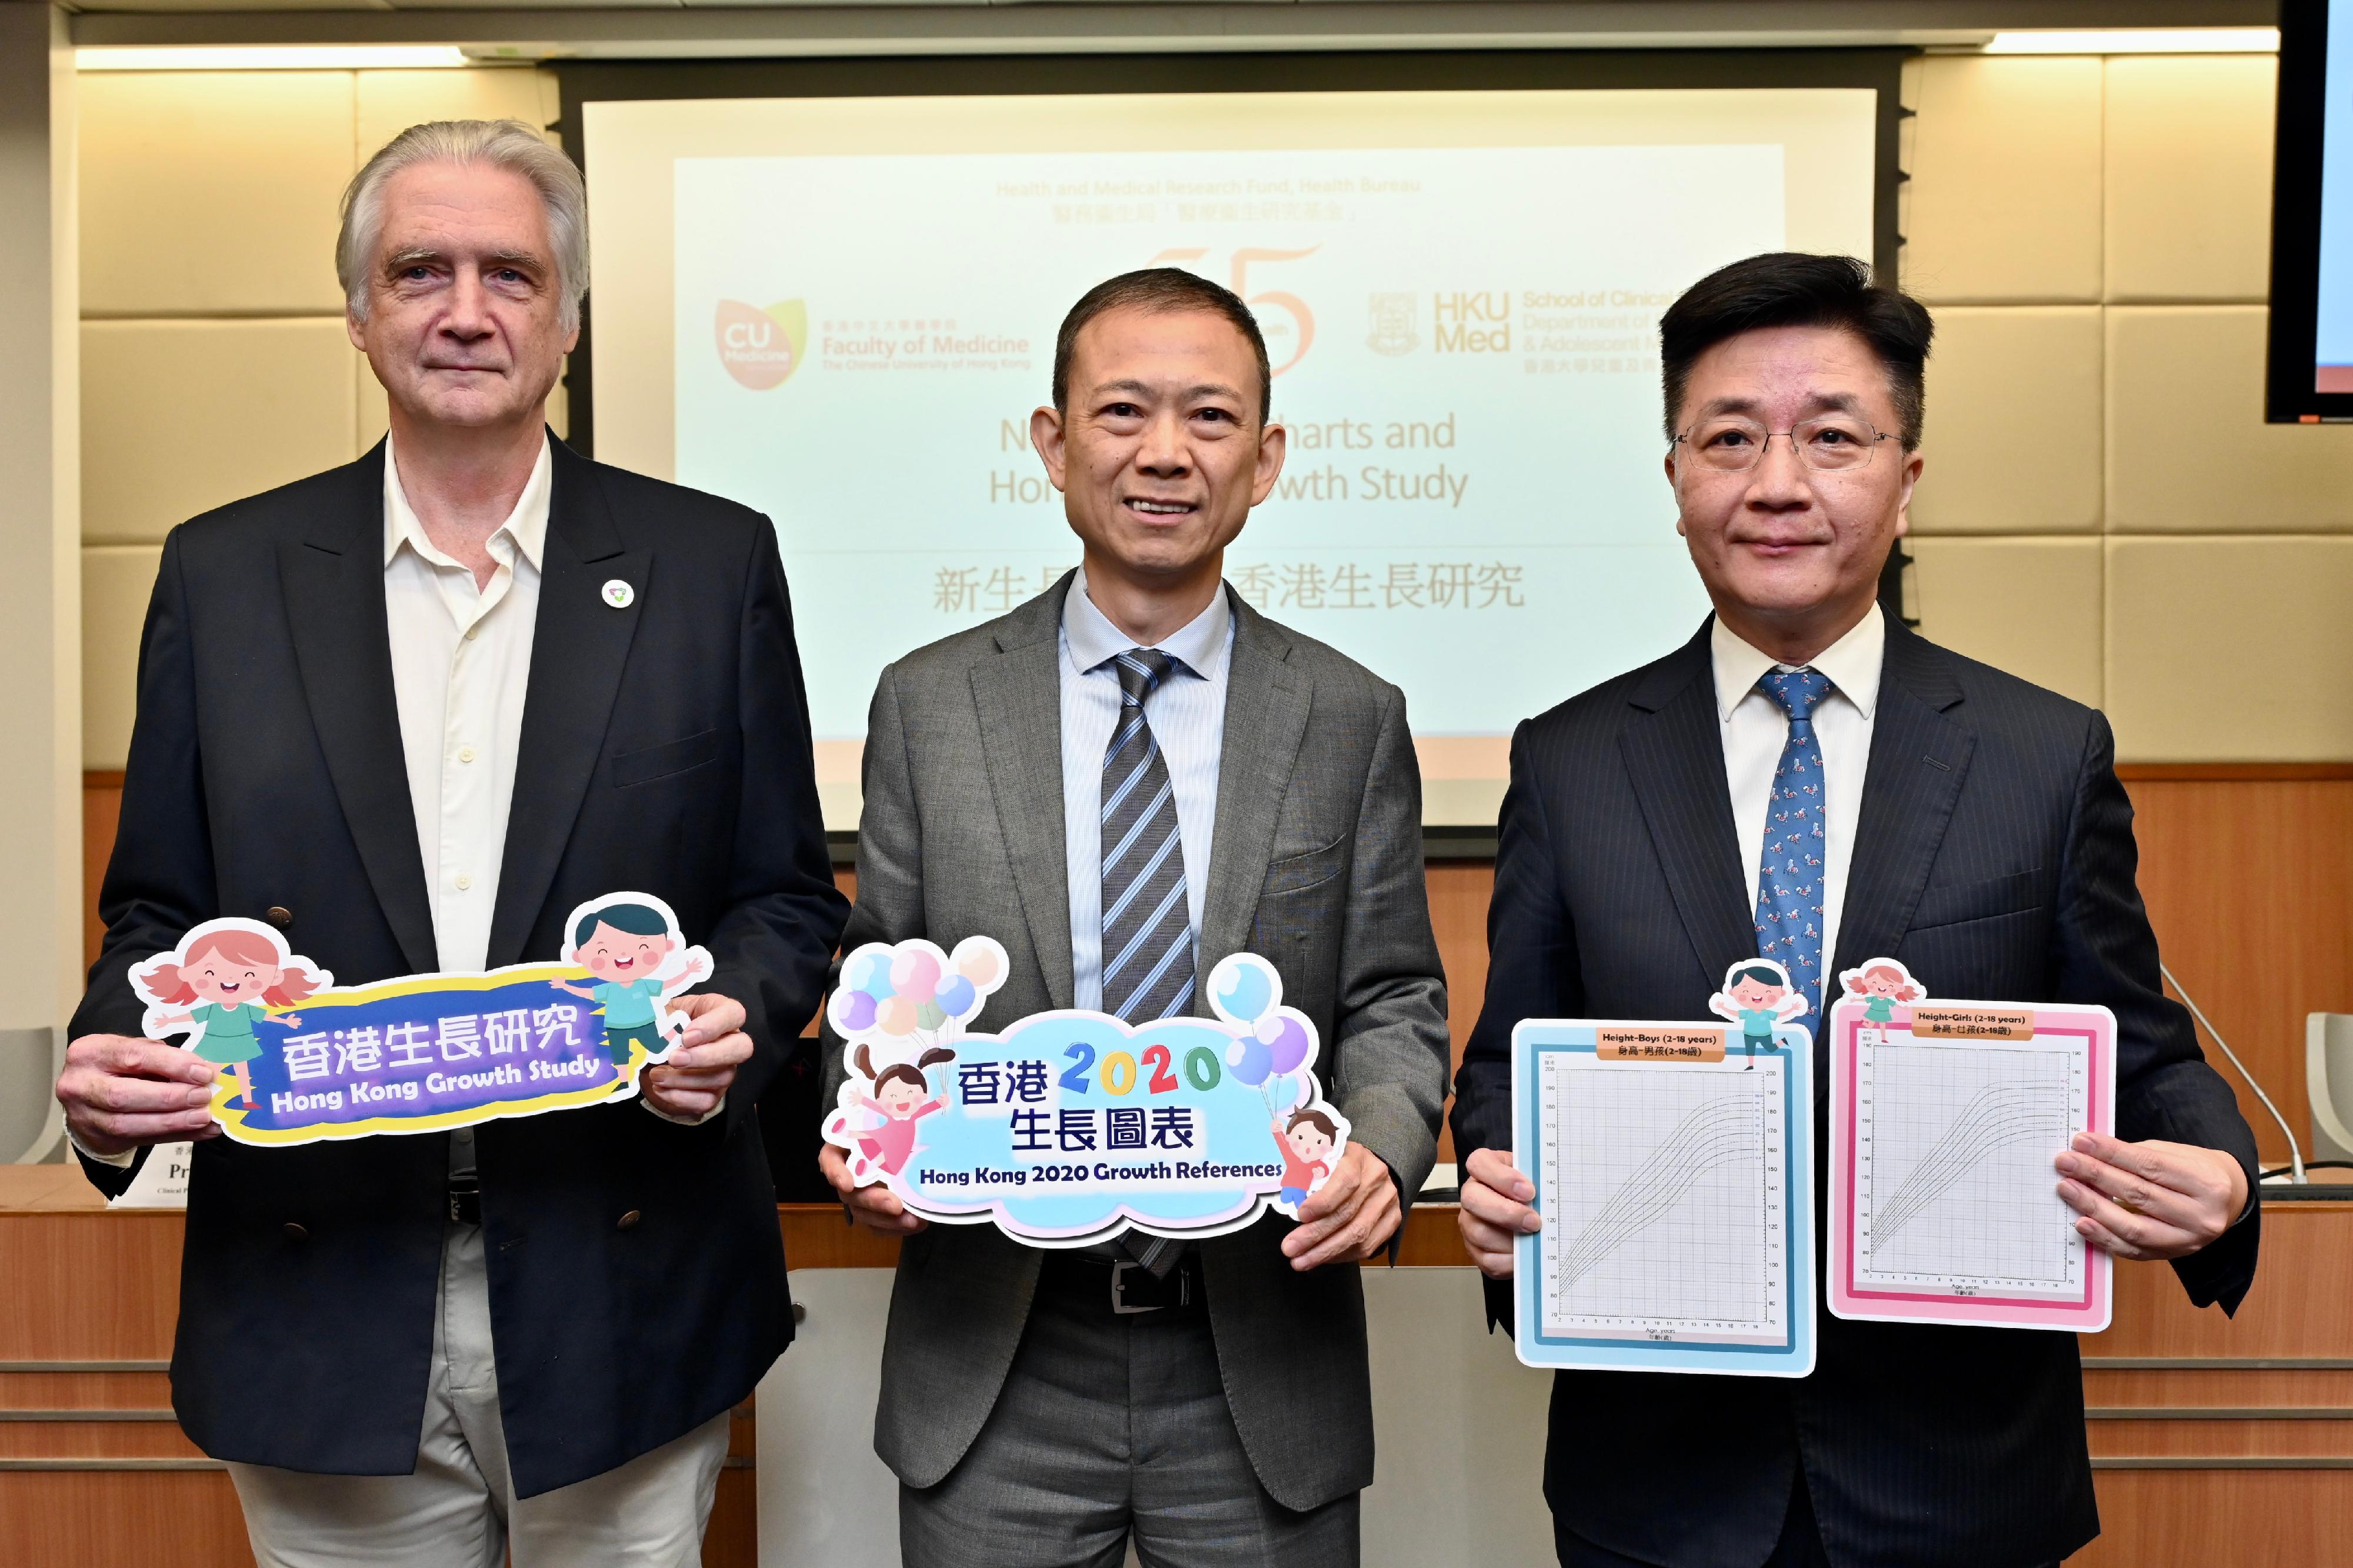 The Consultant Community Medicine of the Family and Student Health Branch of the Department of Health, Dr Thomas Chung (centre); the Clinical Professional Consultant of the Department of Paediatrics of the City University of Hong Kong, Professor Tony Nelson (left); and the Clinical Professor of the Department of Paediatrics and Adolescent Medicine of the University of Hong Kong, Professor Patrick Ip (right), hold a press conference today (April 22) on findings of the Hong Kong Growth Study and implementation plan of new growth charts.